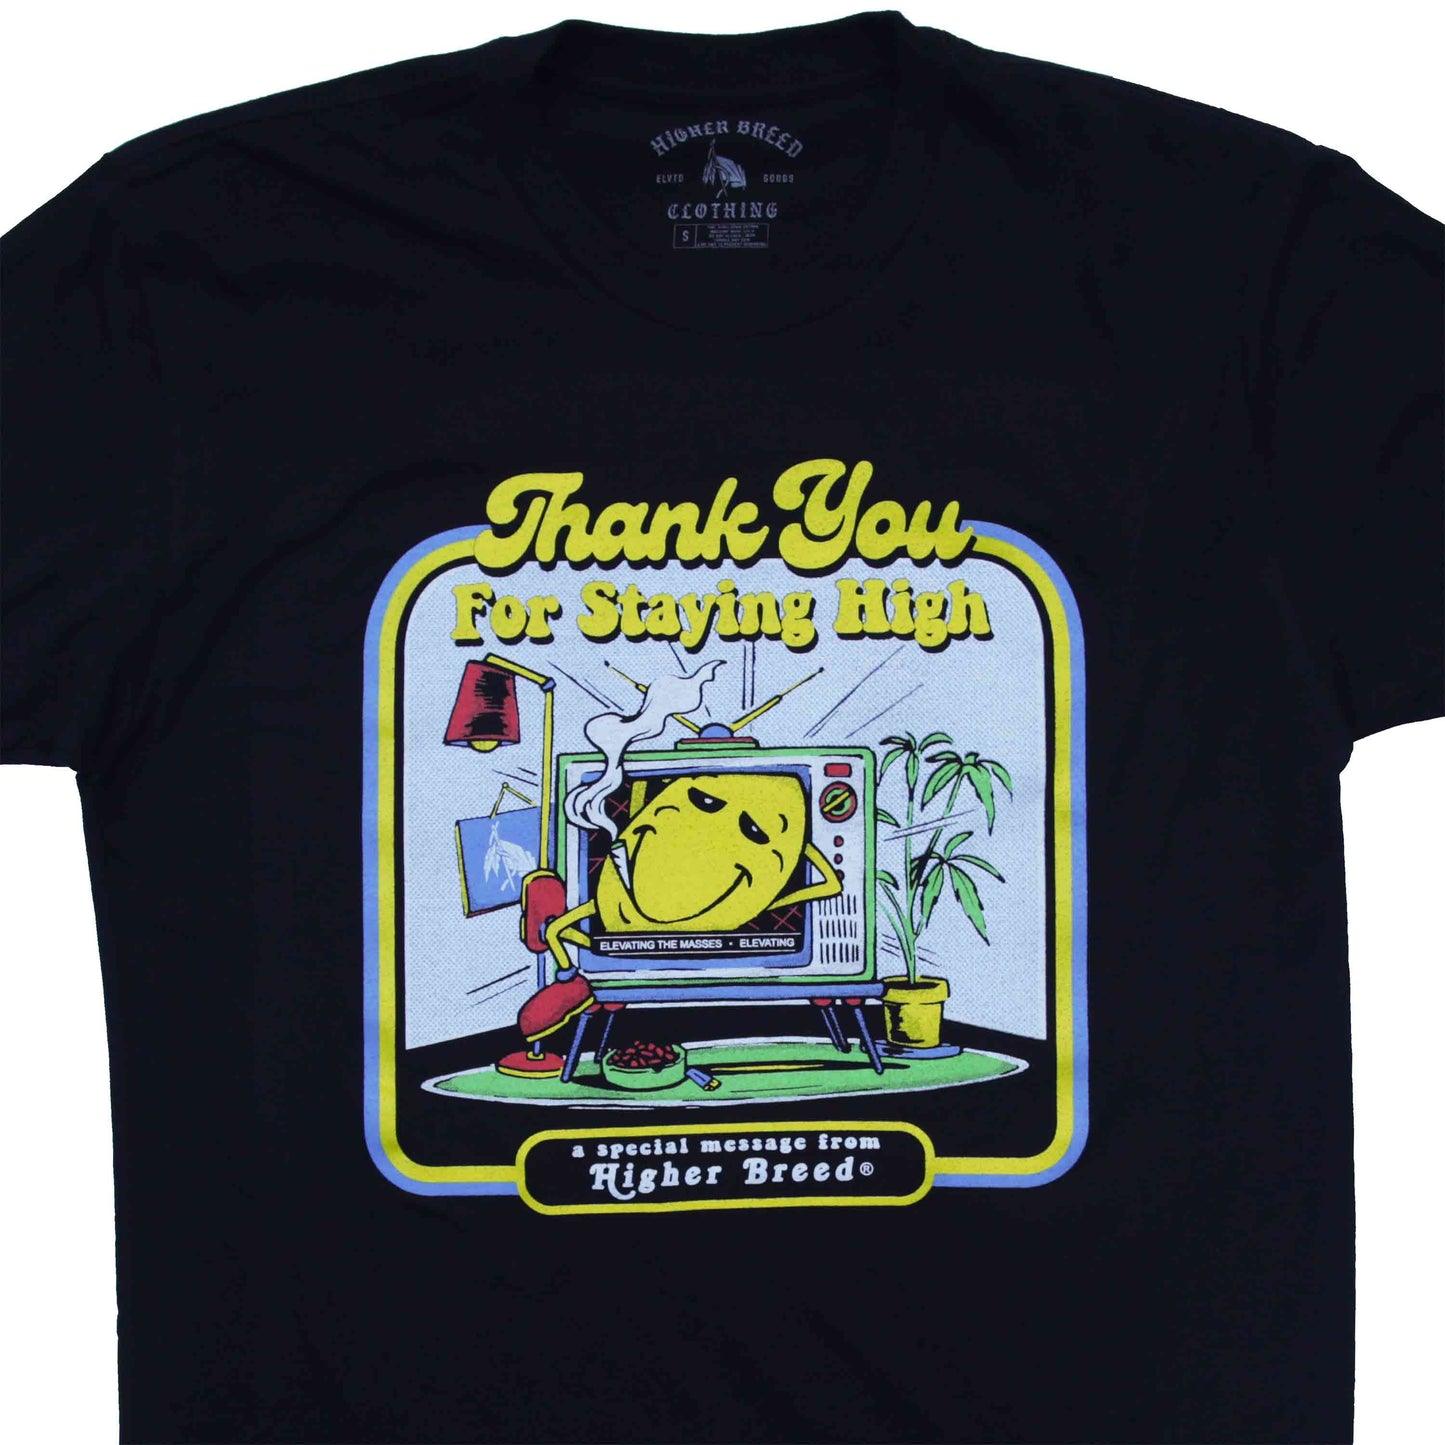 Higher Breed - Thank you for Staying High - T-Shirt